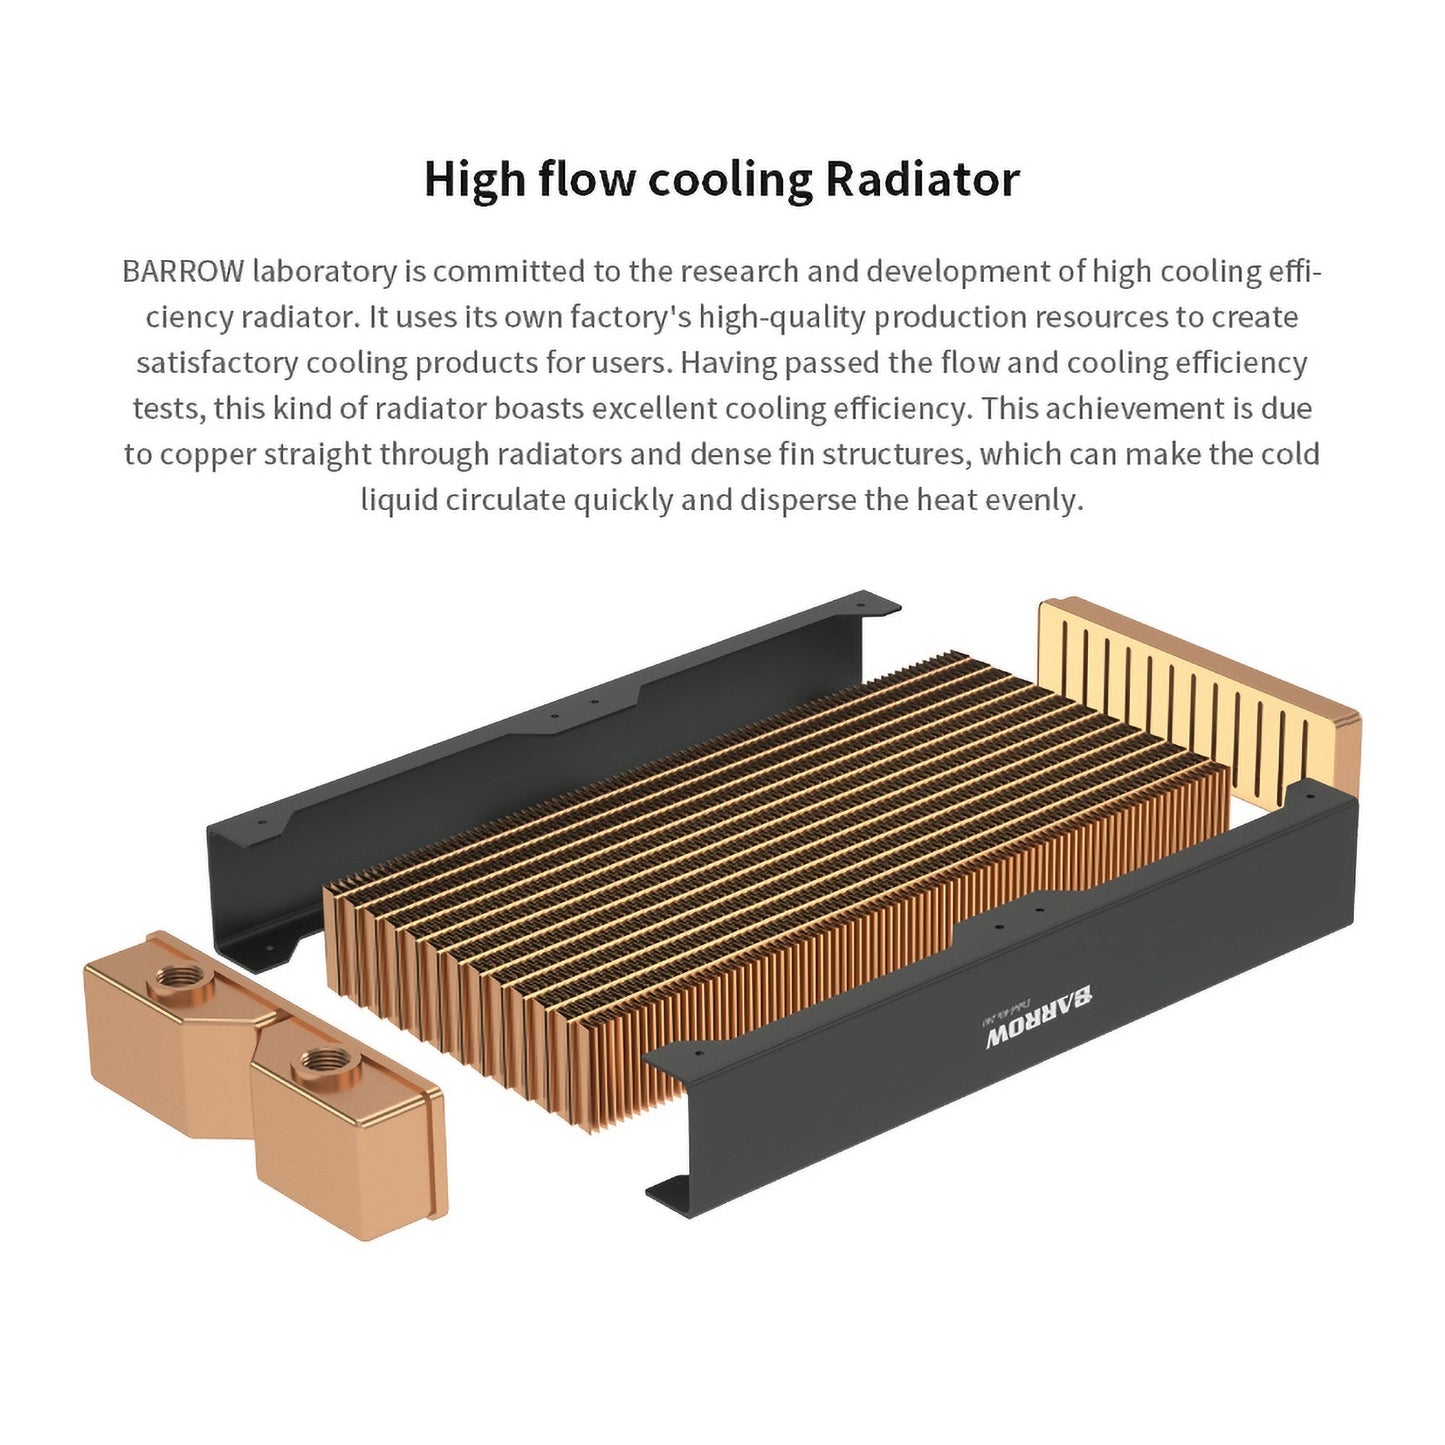 Barrow 480 Red Copper Radiator, Black/White 28mm Thickness G1/4" Thread High-density Revolving Heat Dissipation Passageway Radiator, For Water Cooling System, Dabel-28b 480 / Dabel-28a 480